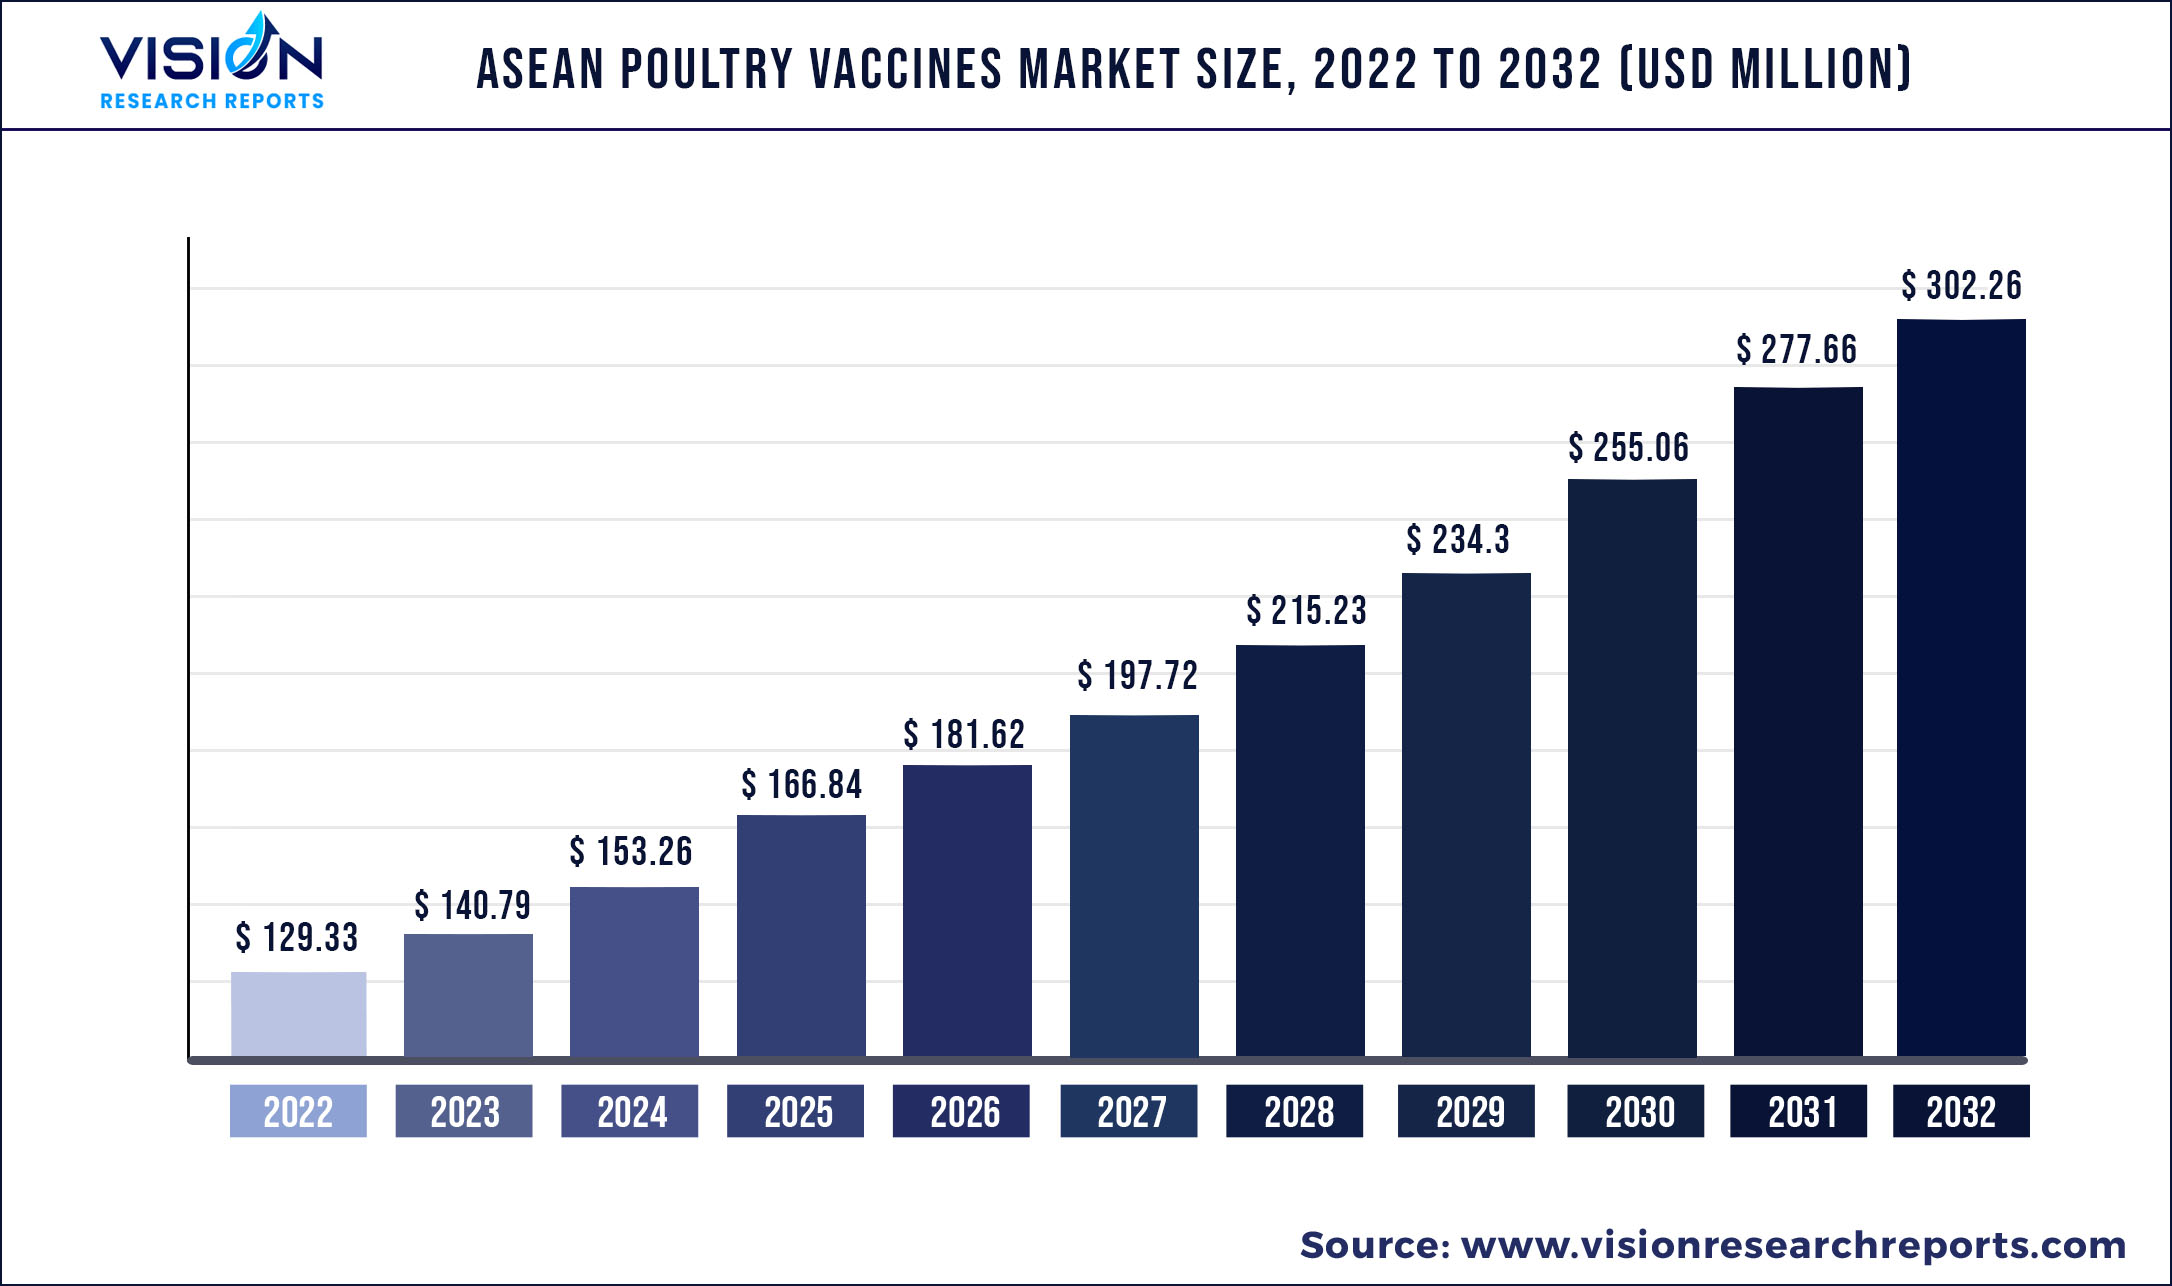 ASEAN Poultry Vaccines Market Size 2022 to 2032